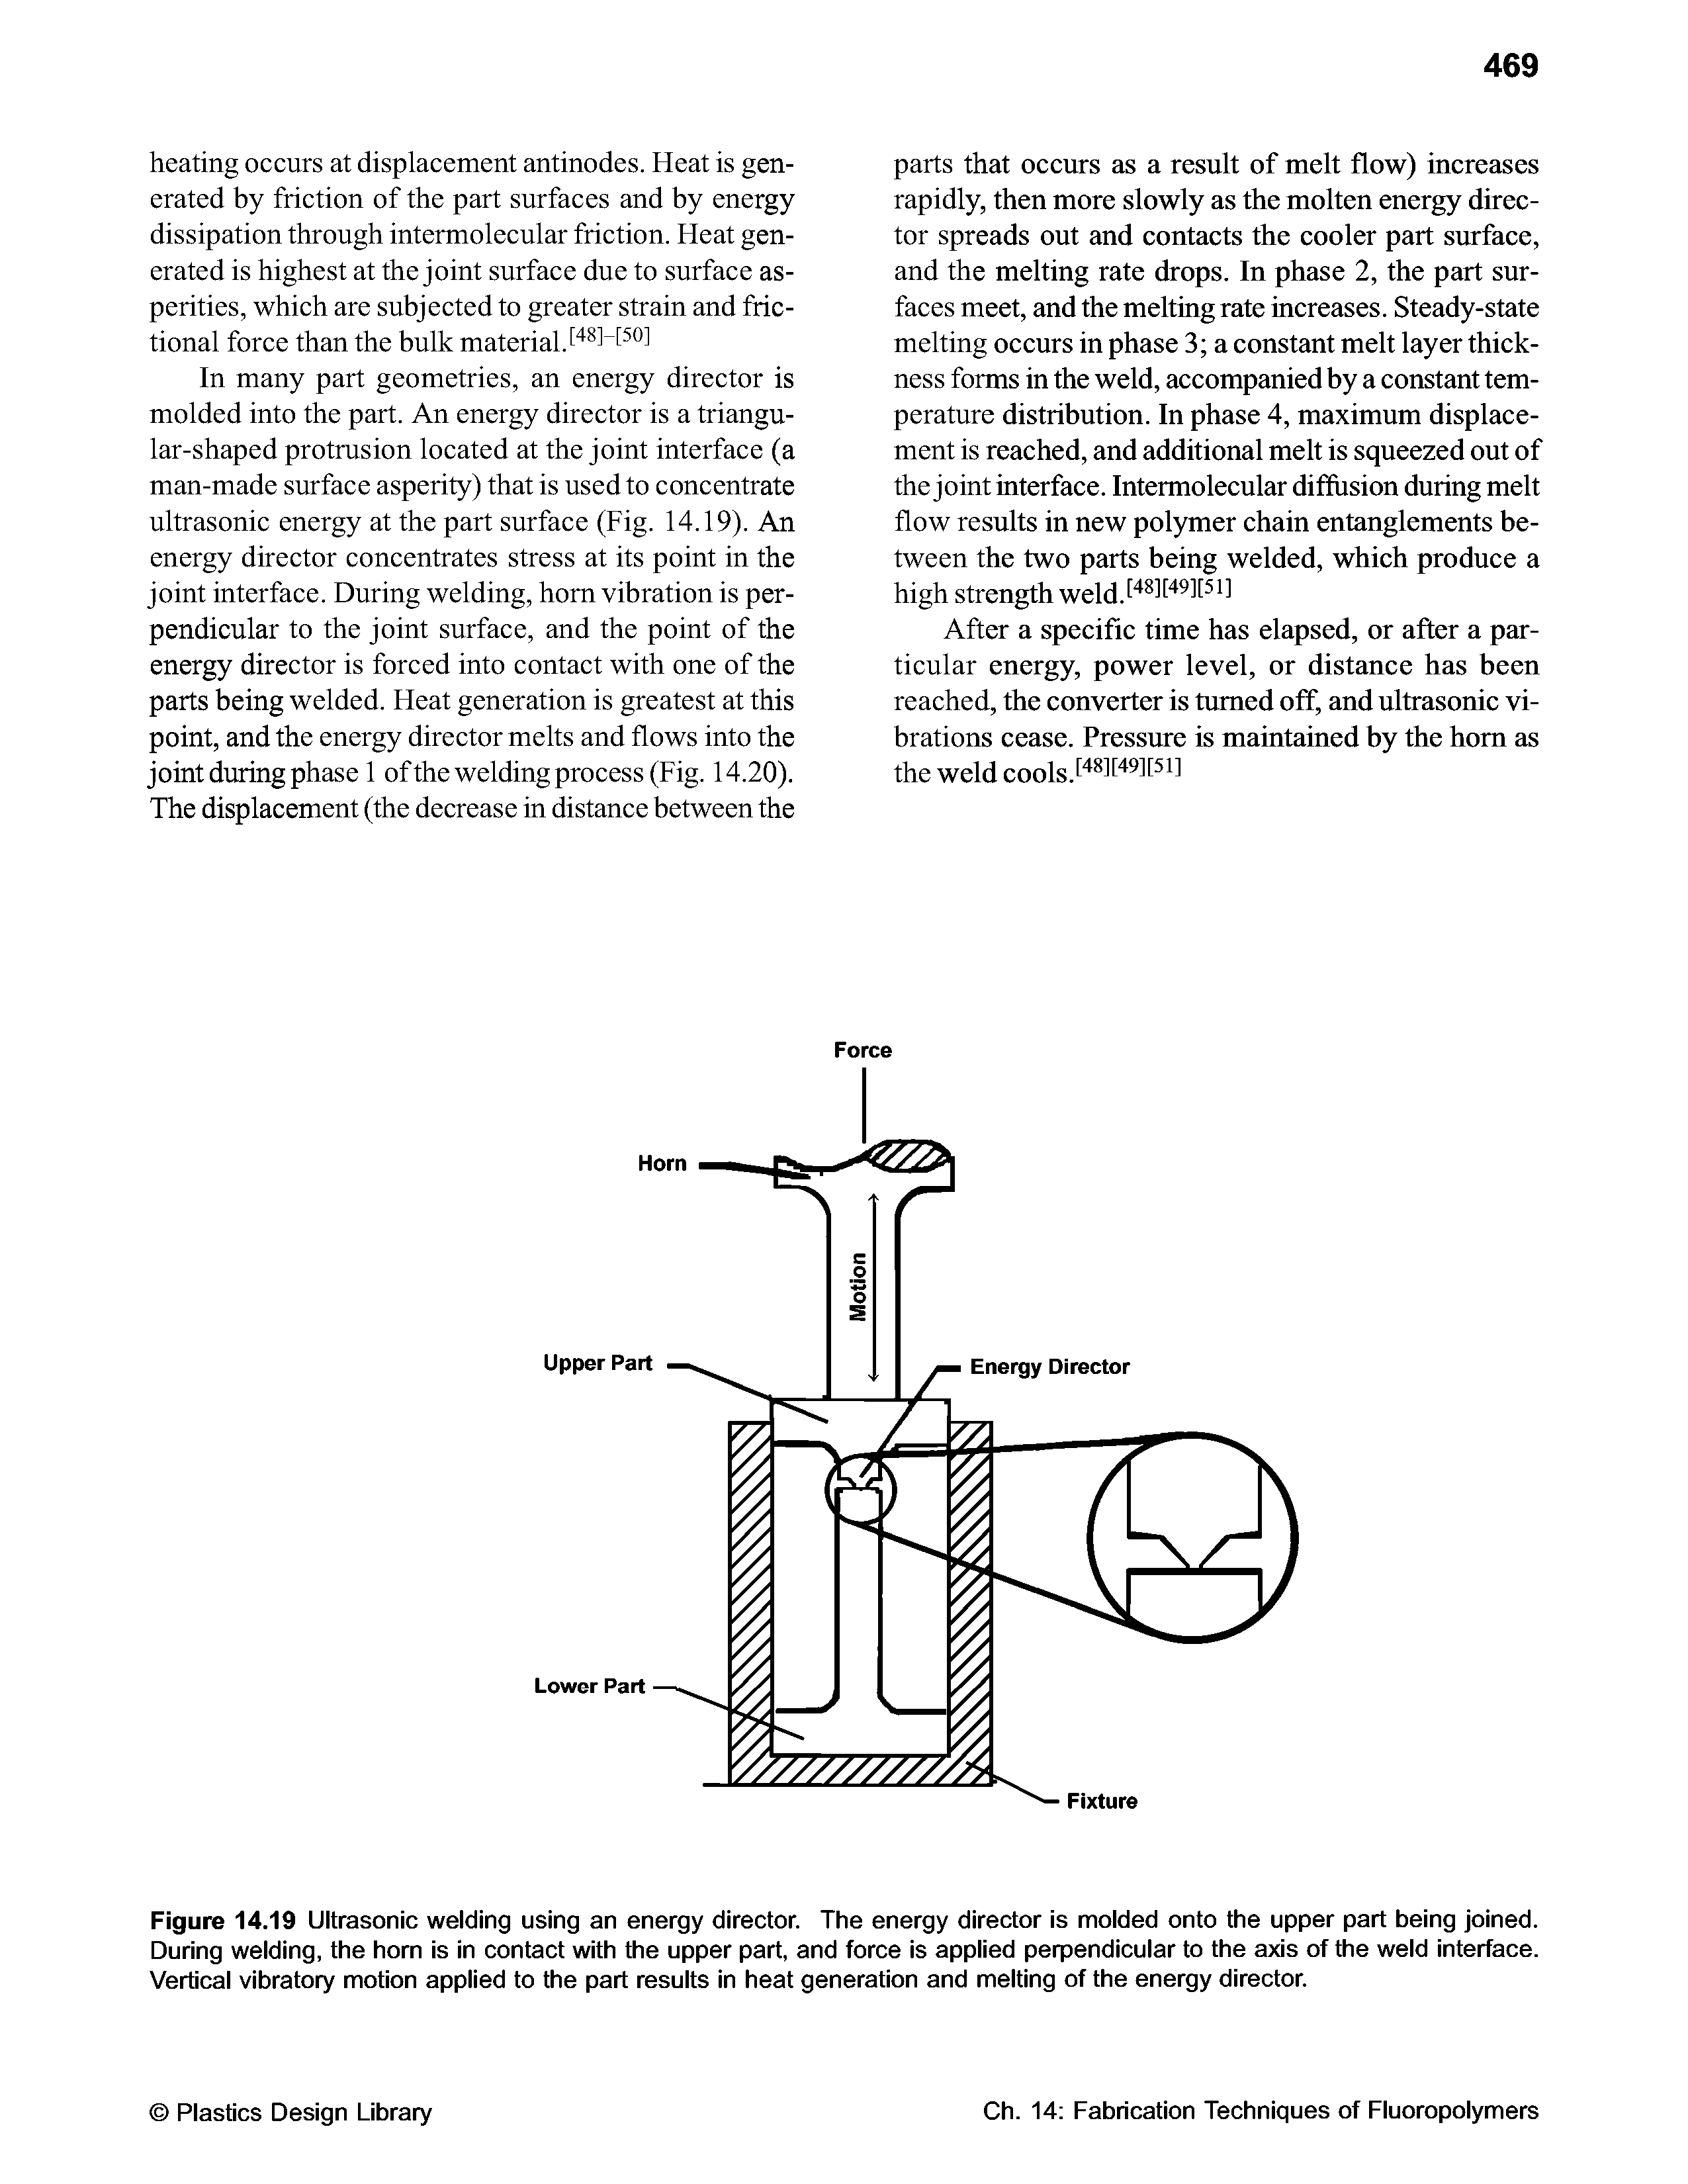 Figure 14.19 Ultrasonic welding using an energy director. The energy director is molded onto the upper part being joined. During welding, the horn is in contact with the upper part, and force is applied perpendicular to the axis of the weld interface. Vertical vibratory motion applied to the part results in heat generation and melting of the energy director.